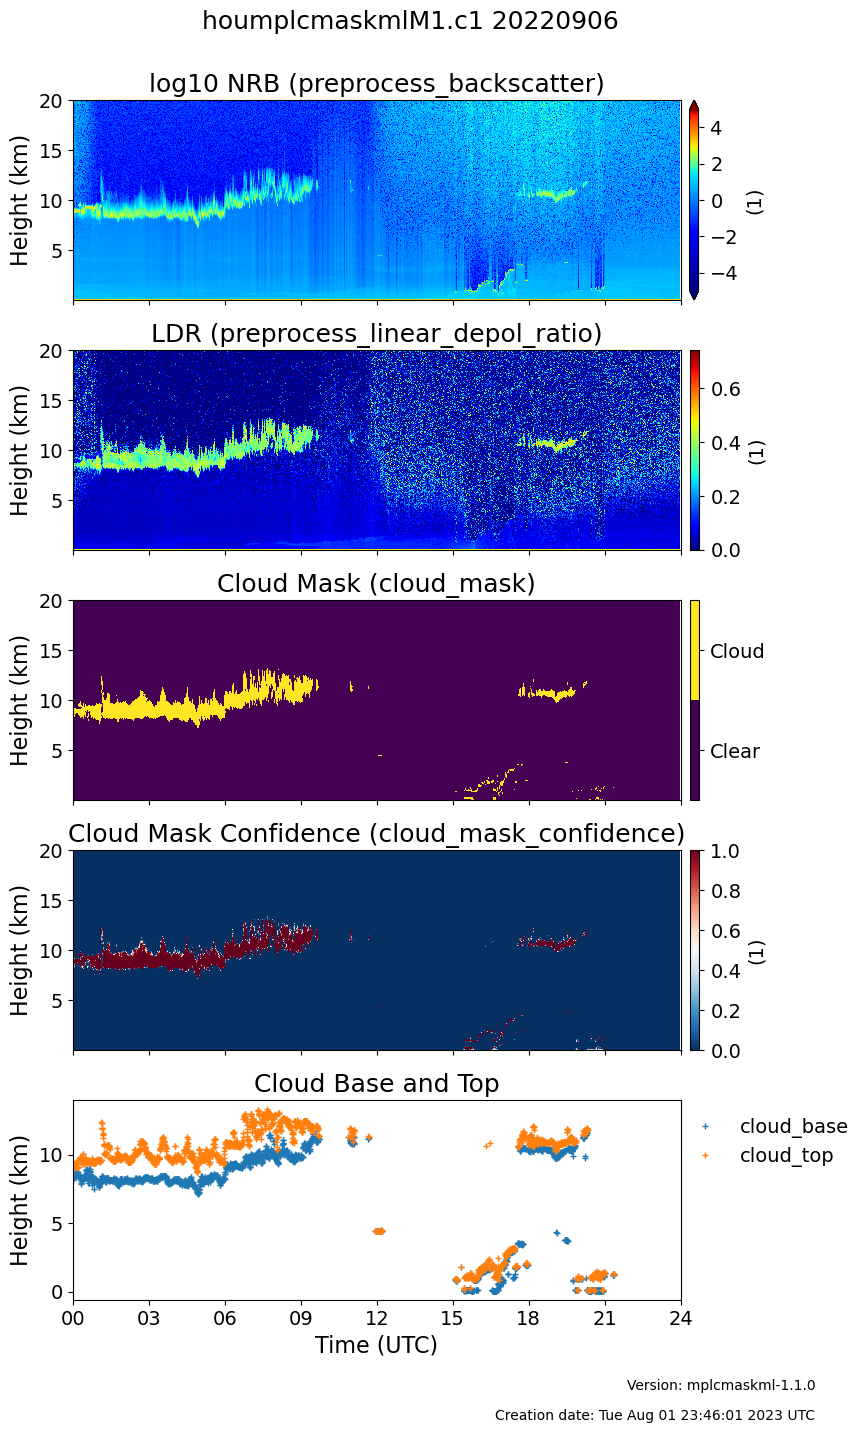 This sample quicklook plot from the TRACER ARM Mobile Facility site shows the log of the normalized relative backscatter (log10 NRB), linear depolarization ratio (LDR), and cloud mask from the MPLCMASKML value-added product for September 6, 2022. In addition, the plot contains the machine learning model’s confidence in its prediction, as well as cloud base and cloud top.